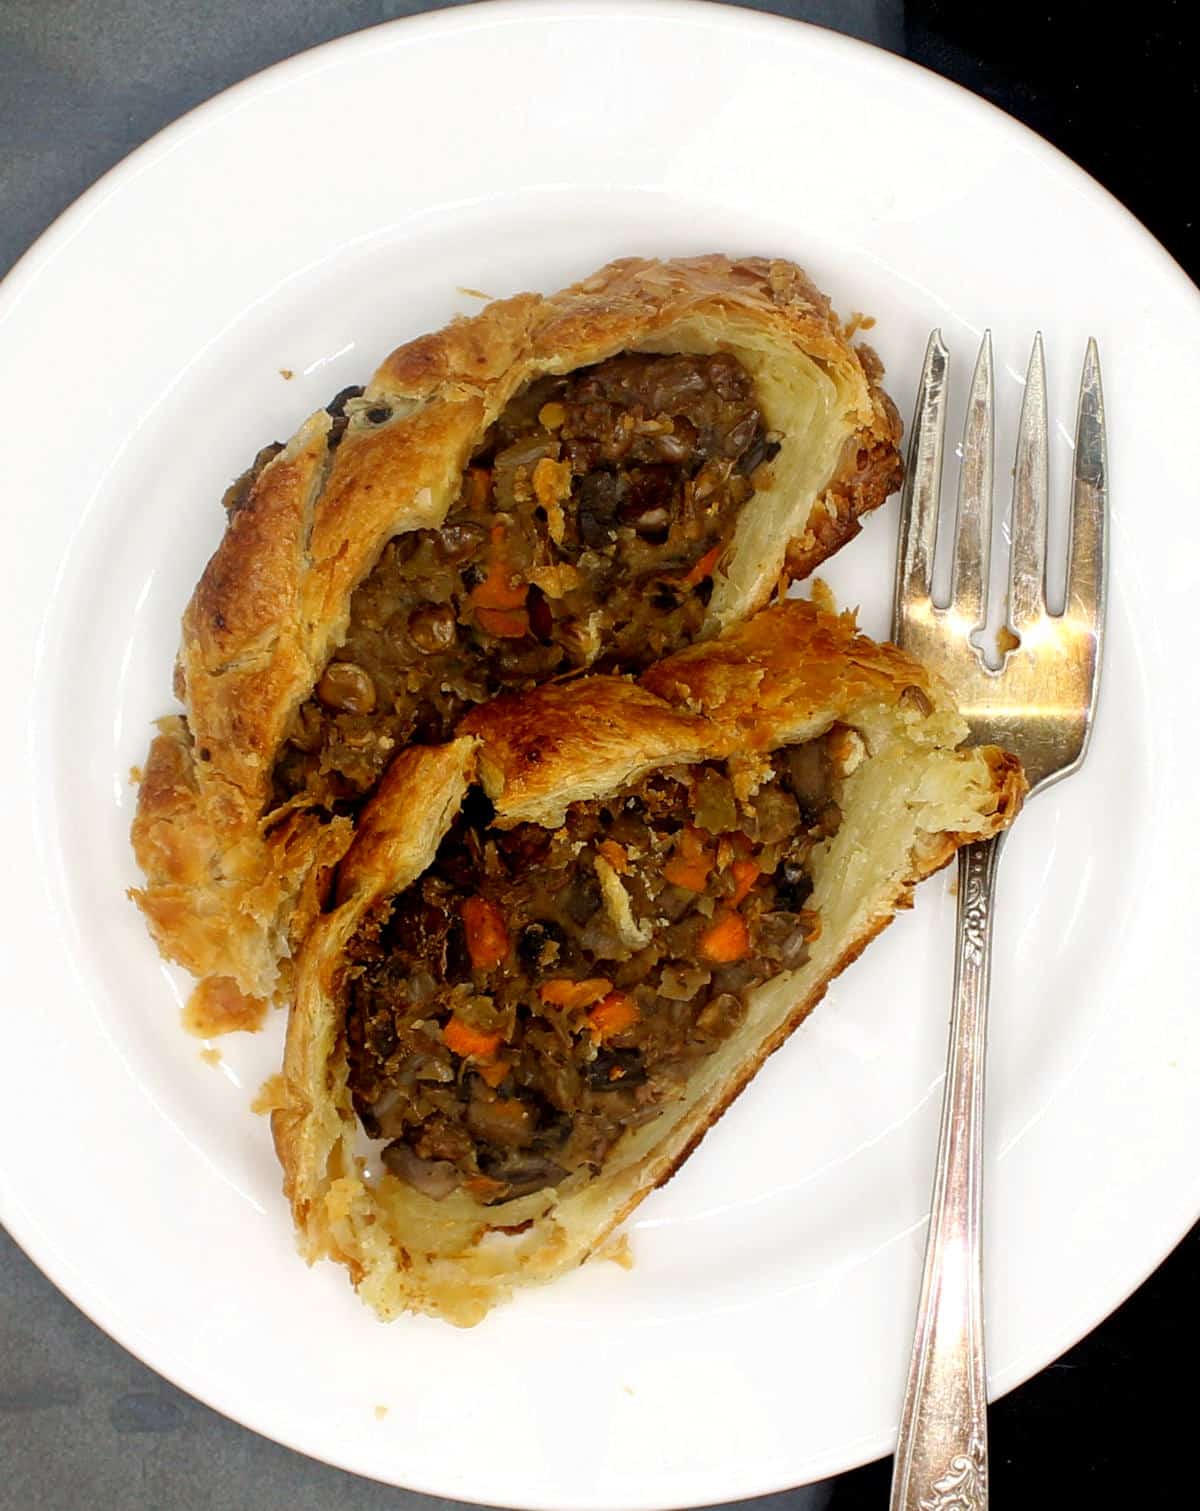 Vegan wellington slices on a white plate with fork.